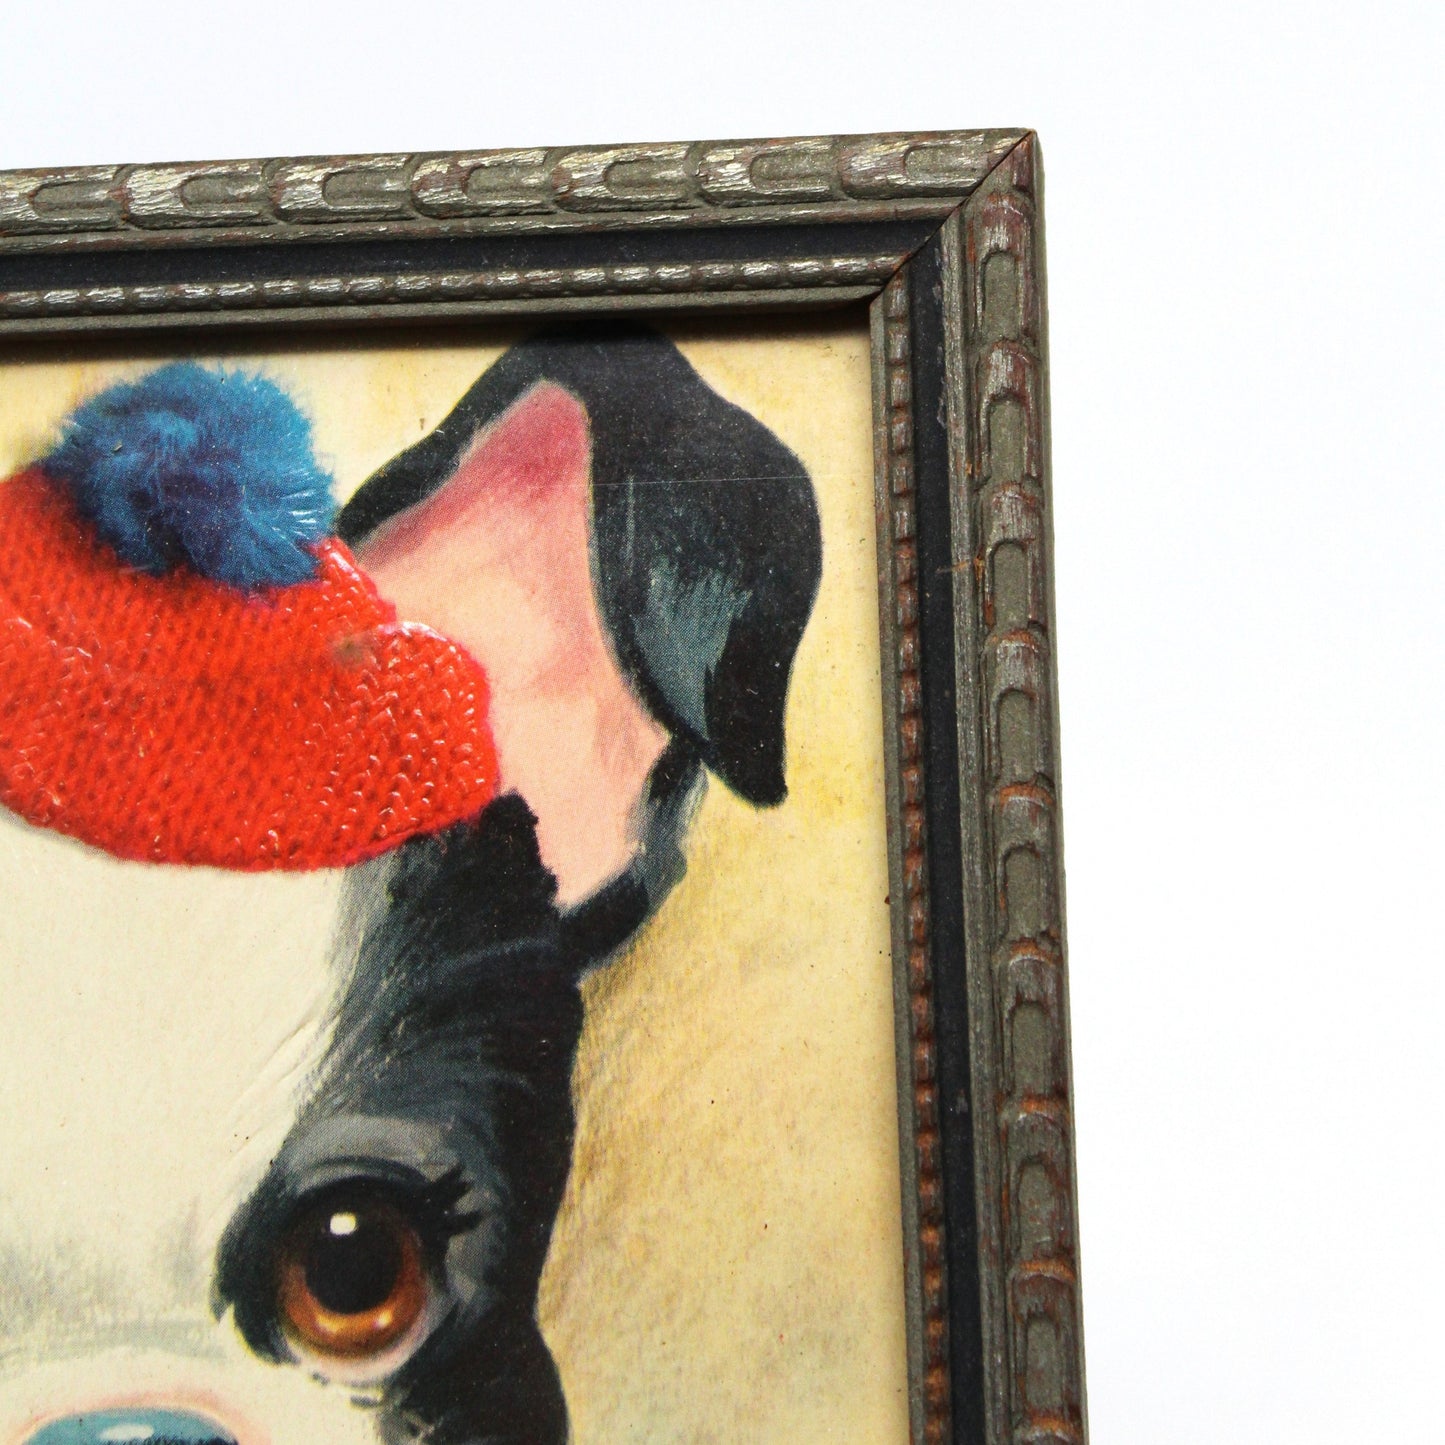 Greeting Card / Birthday, COBY Puppy Dog with Sweater, Framed, Vintage